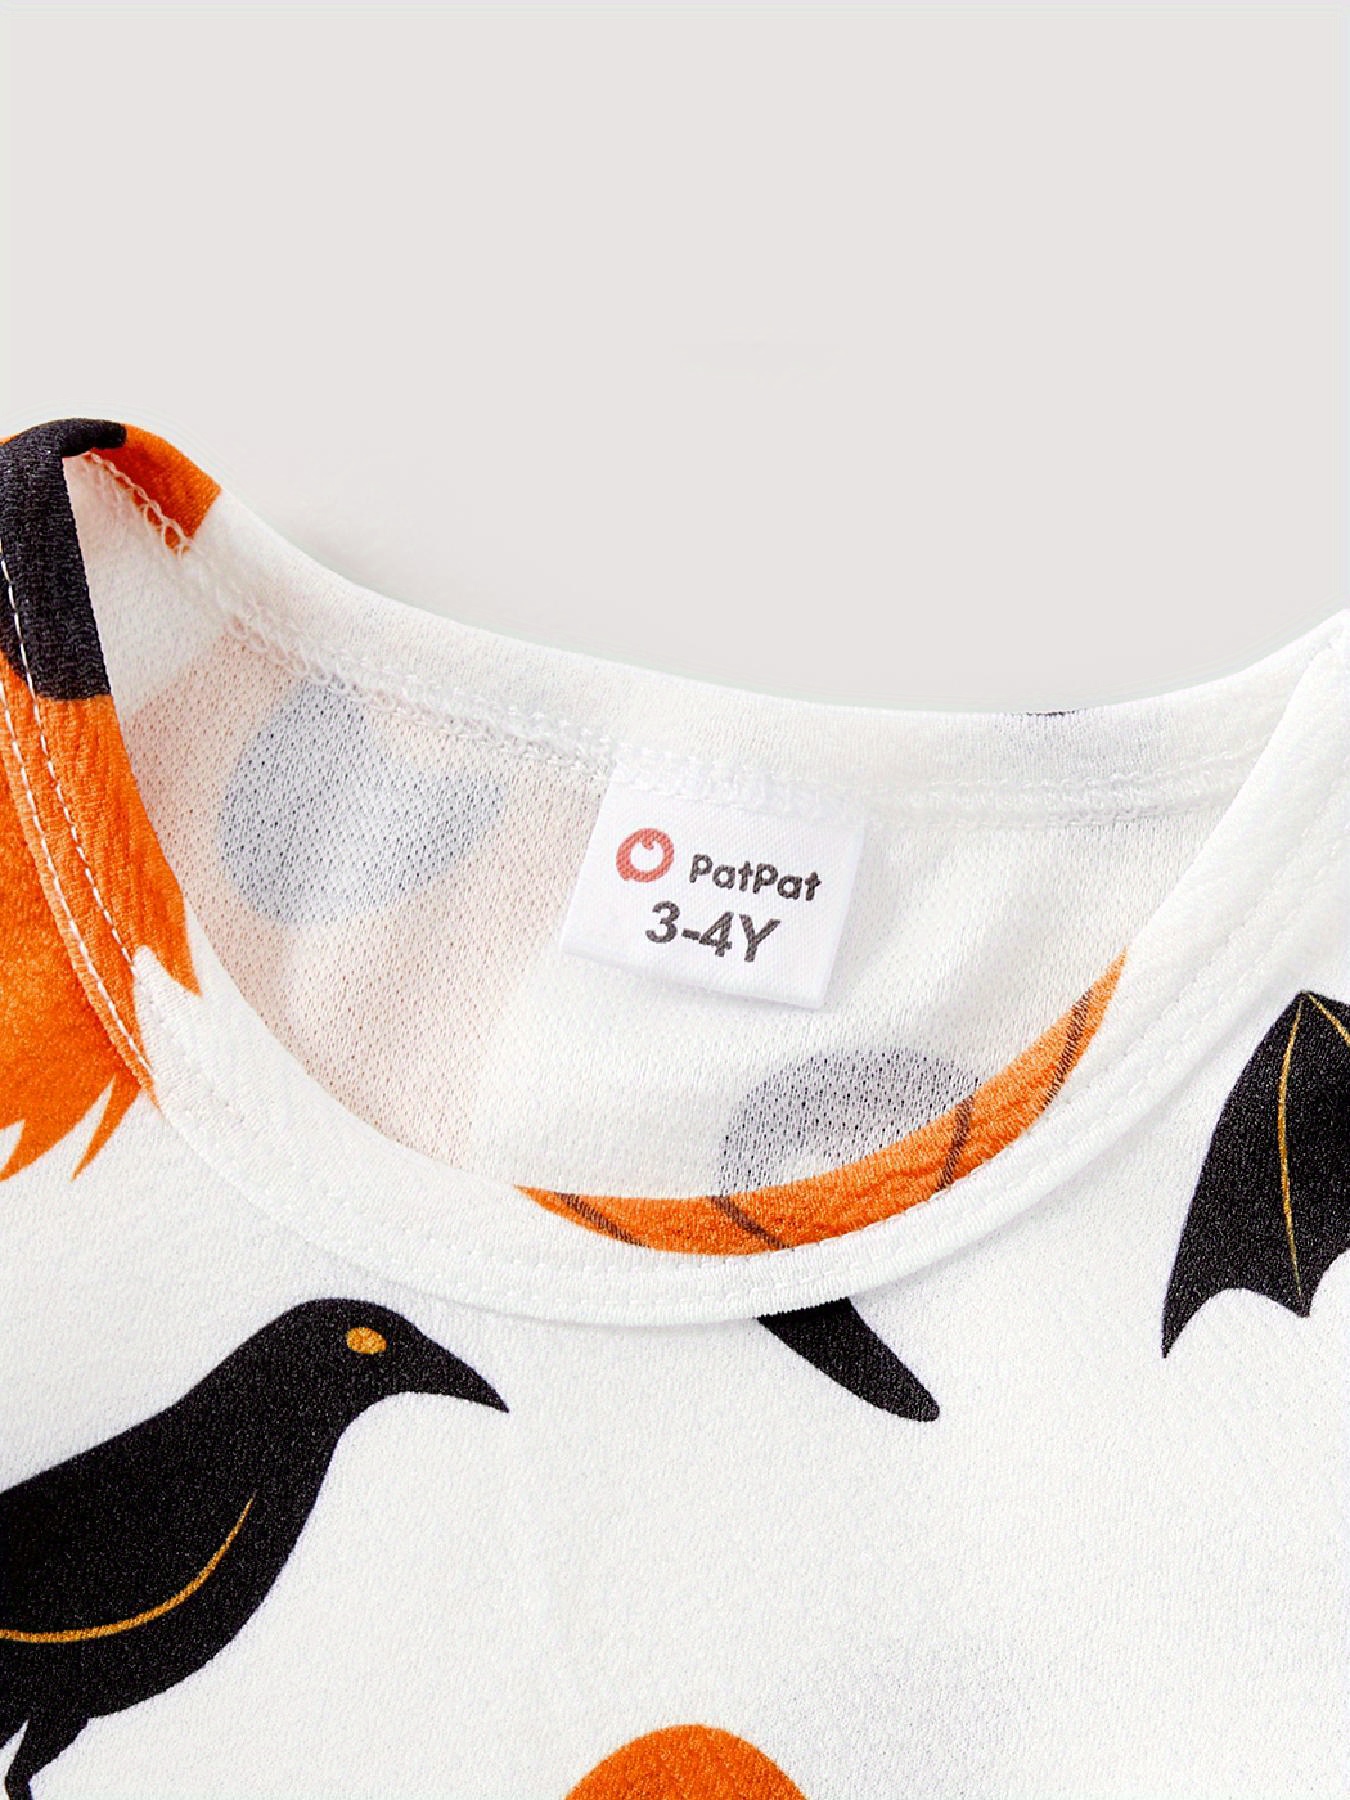 Halloween Party Family Matching Cotton Bat Graphic Short*sleeve T